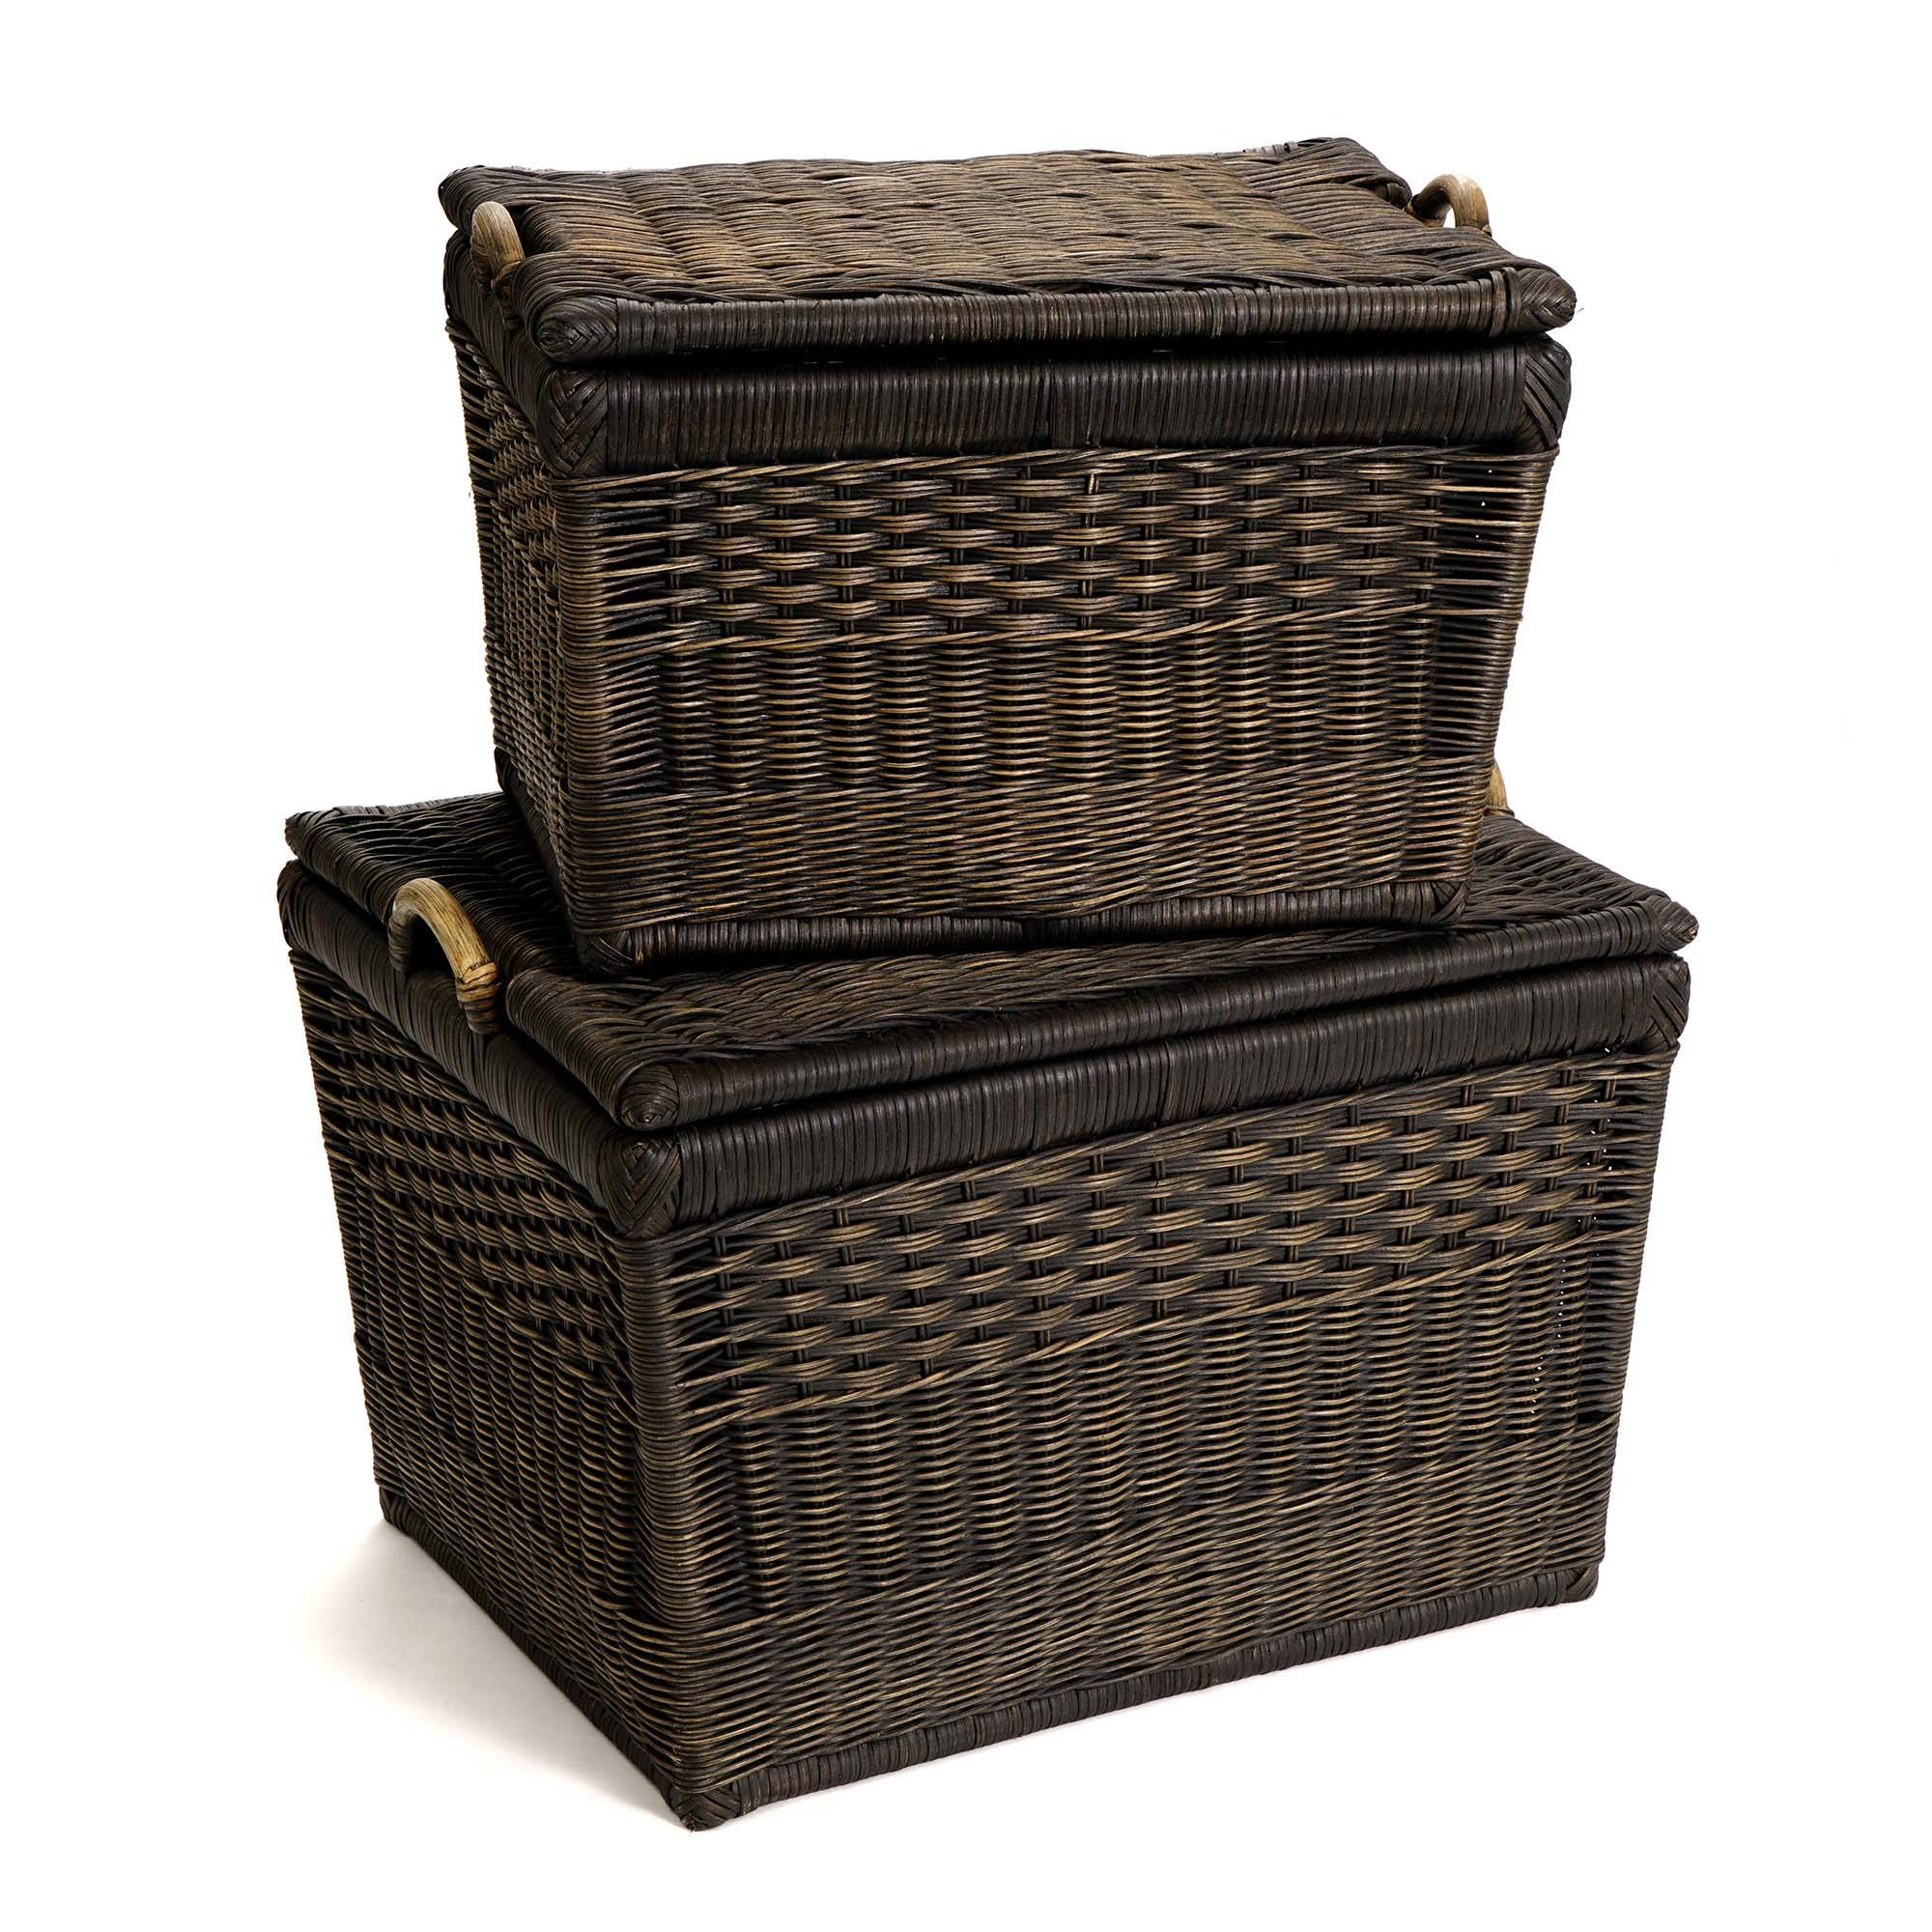  The Basket Lady 3-Compartment Wicker Laundry Sorter Hamper, 30  in L x 15 in W x 28 in H, Sandstone : Home & Kitchen